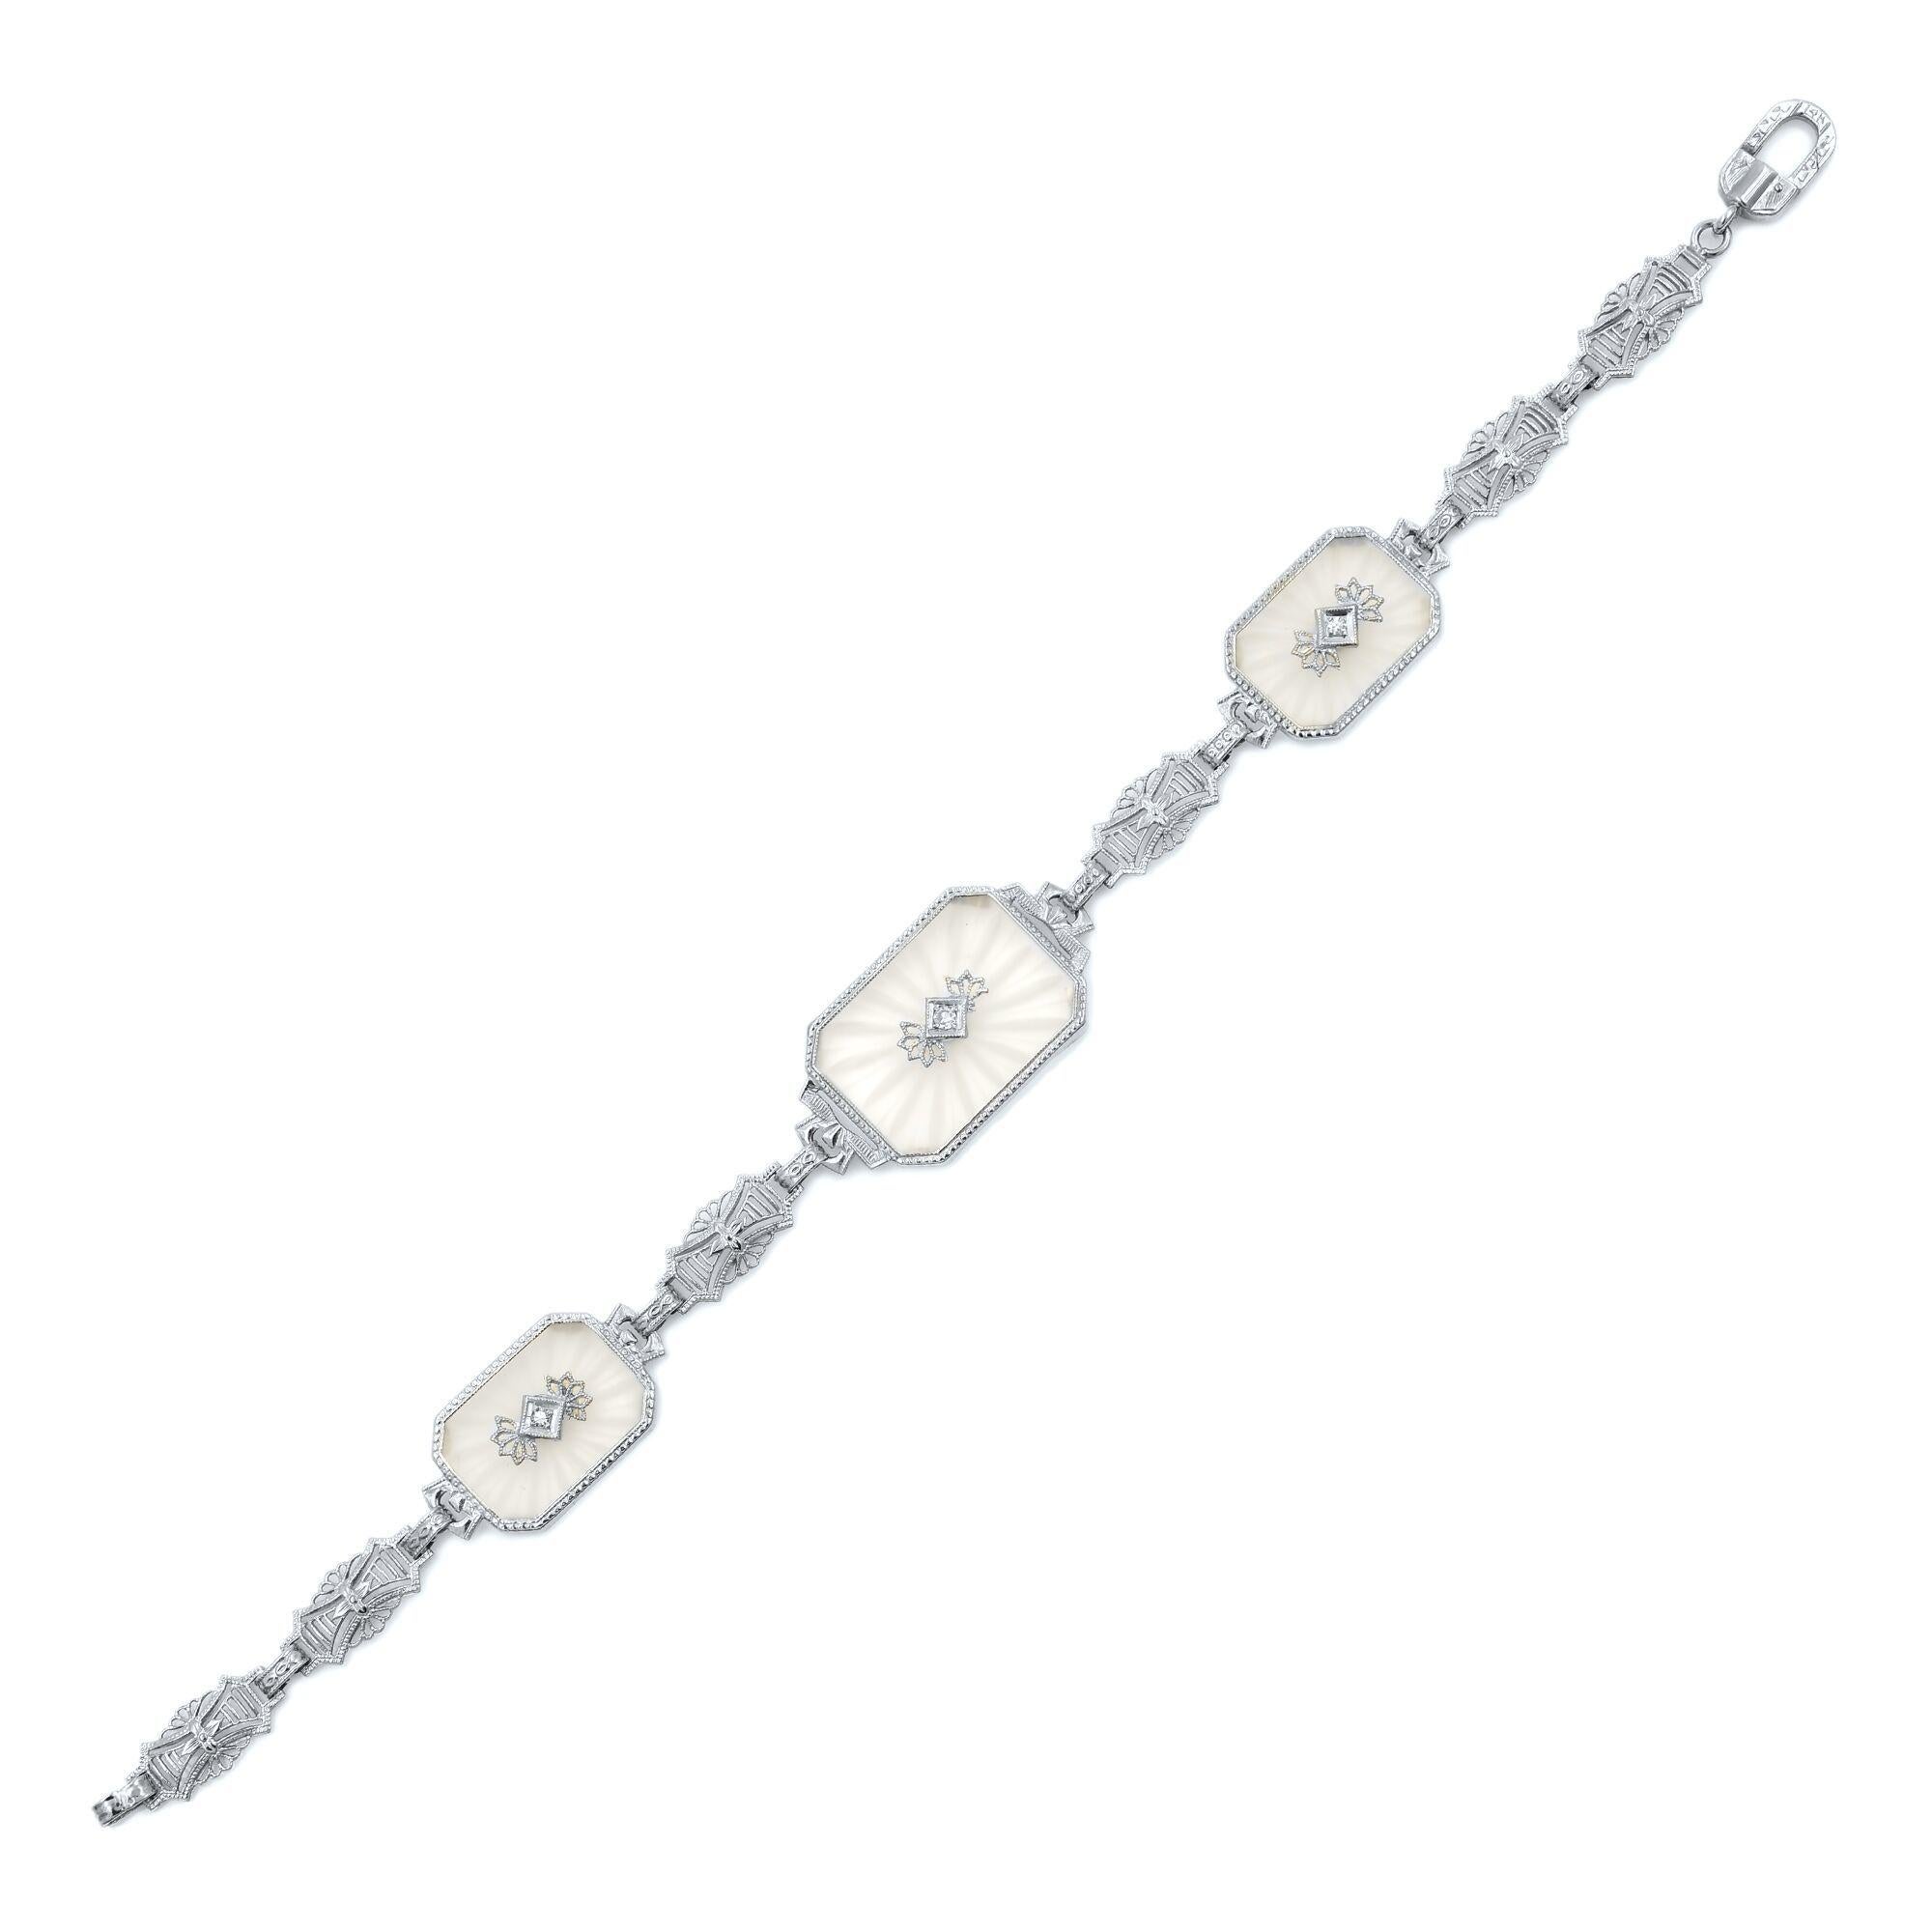 This gorgeous pendant necklace and bracelet set is crafted in 14k white gold and encrusted with 4 round cut diamonds and clear crystals. Chain length: 16 Inches. Pendant size: 38mm. Bracelet length: 7.5 Inches. Total weight 13.6 gms. The bracelet